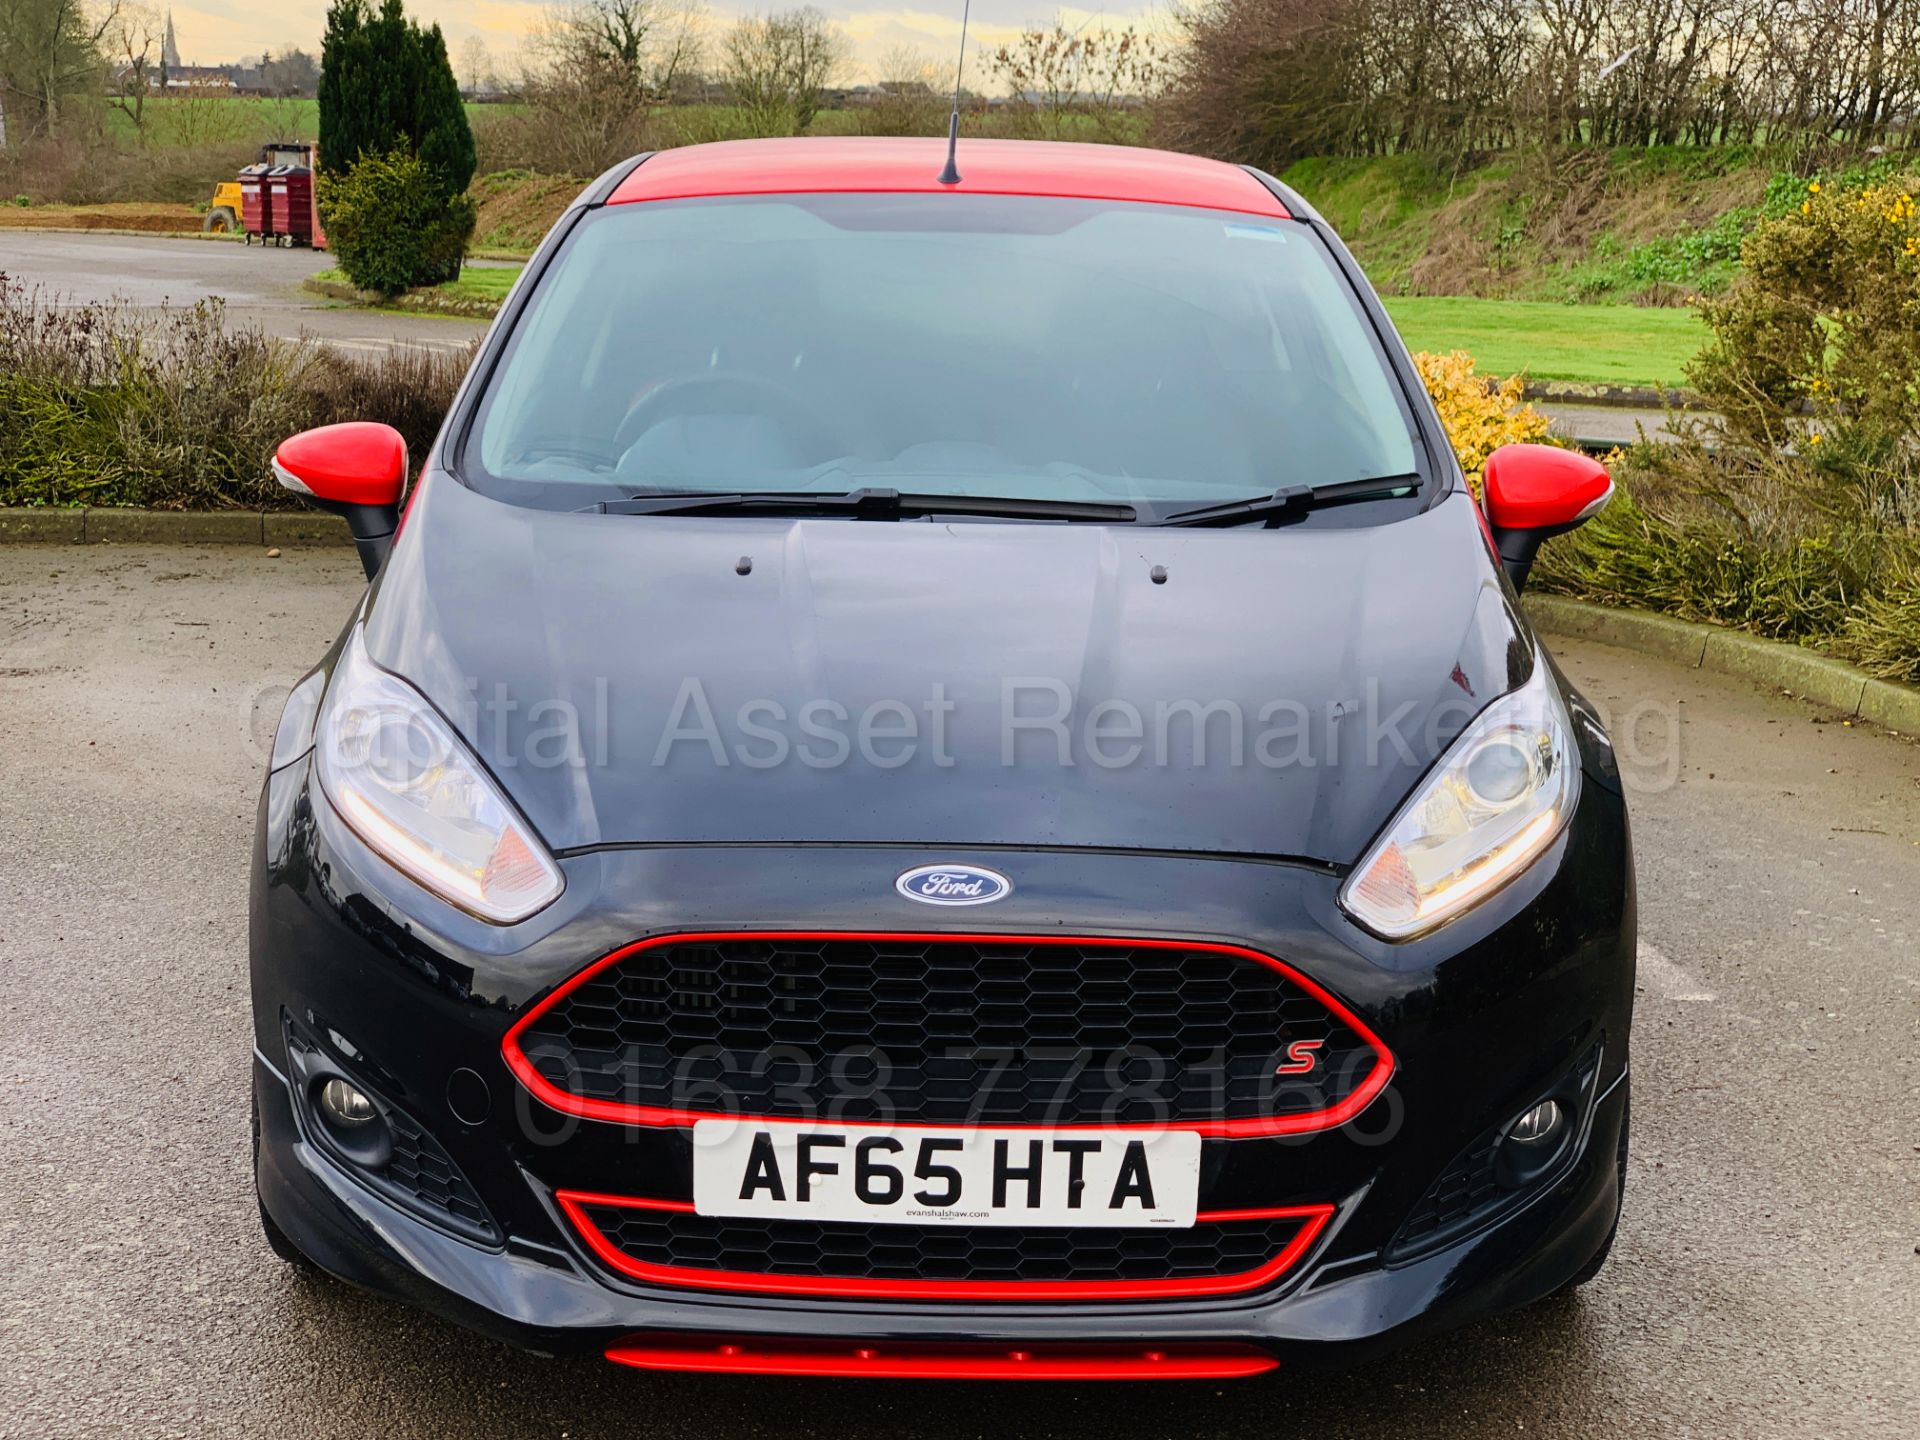 (On Sale) FORD FIESTA *ZETEC S - BLACK EDITION* (2016 MODEL) '1.0L ECO-BOOST - 140 BHP' - Image 3 of 45